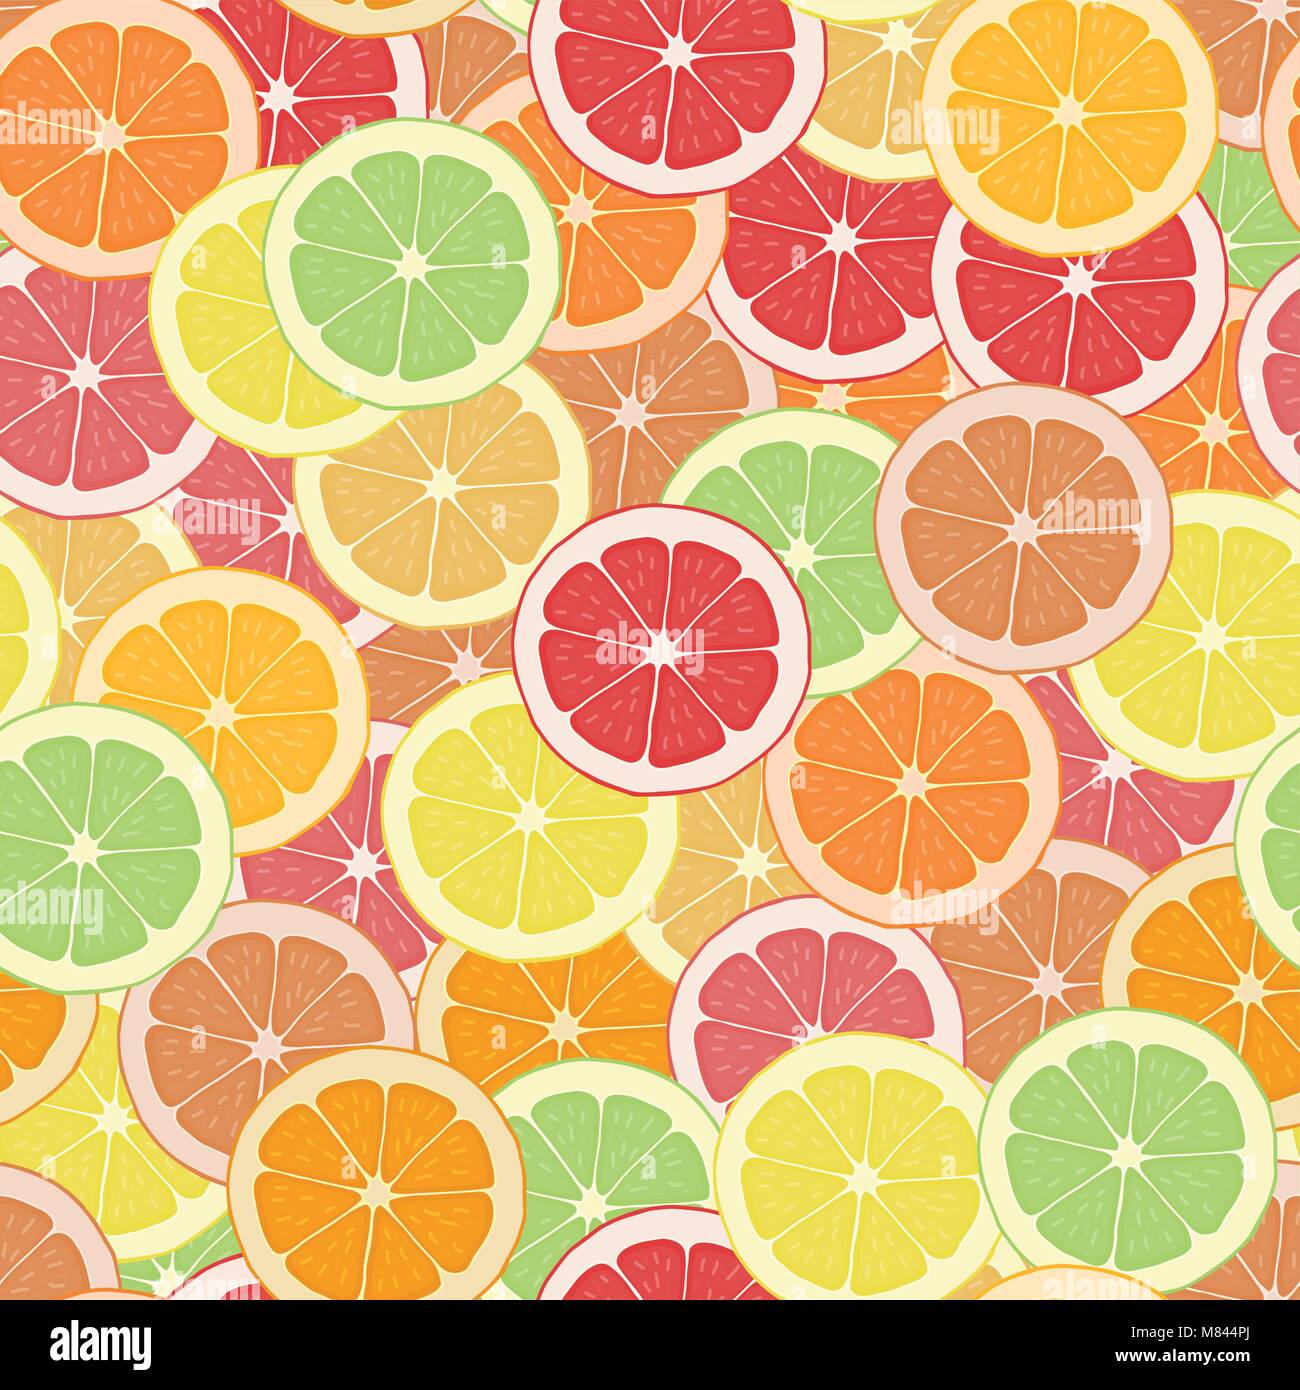 healthy wallpaper background